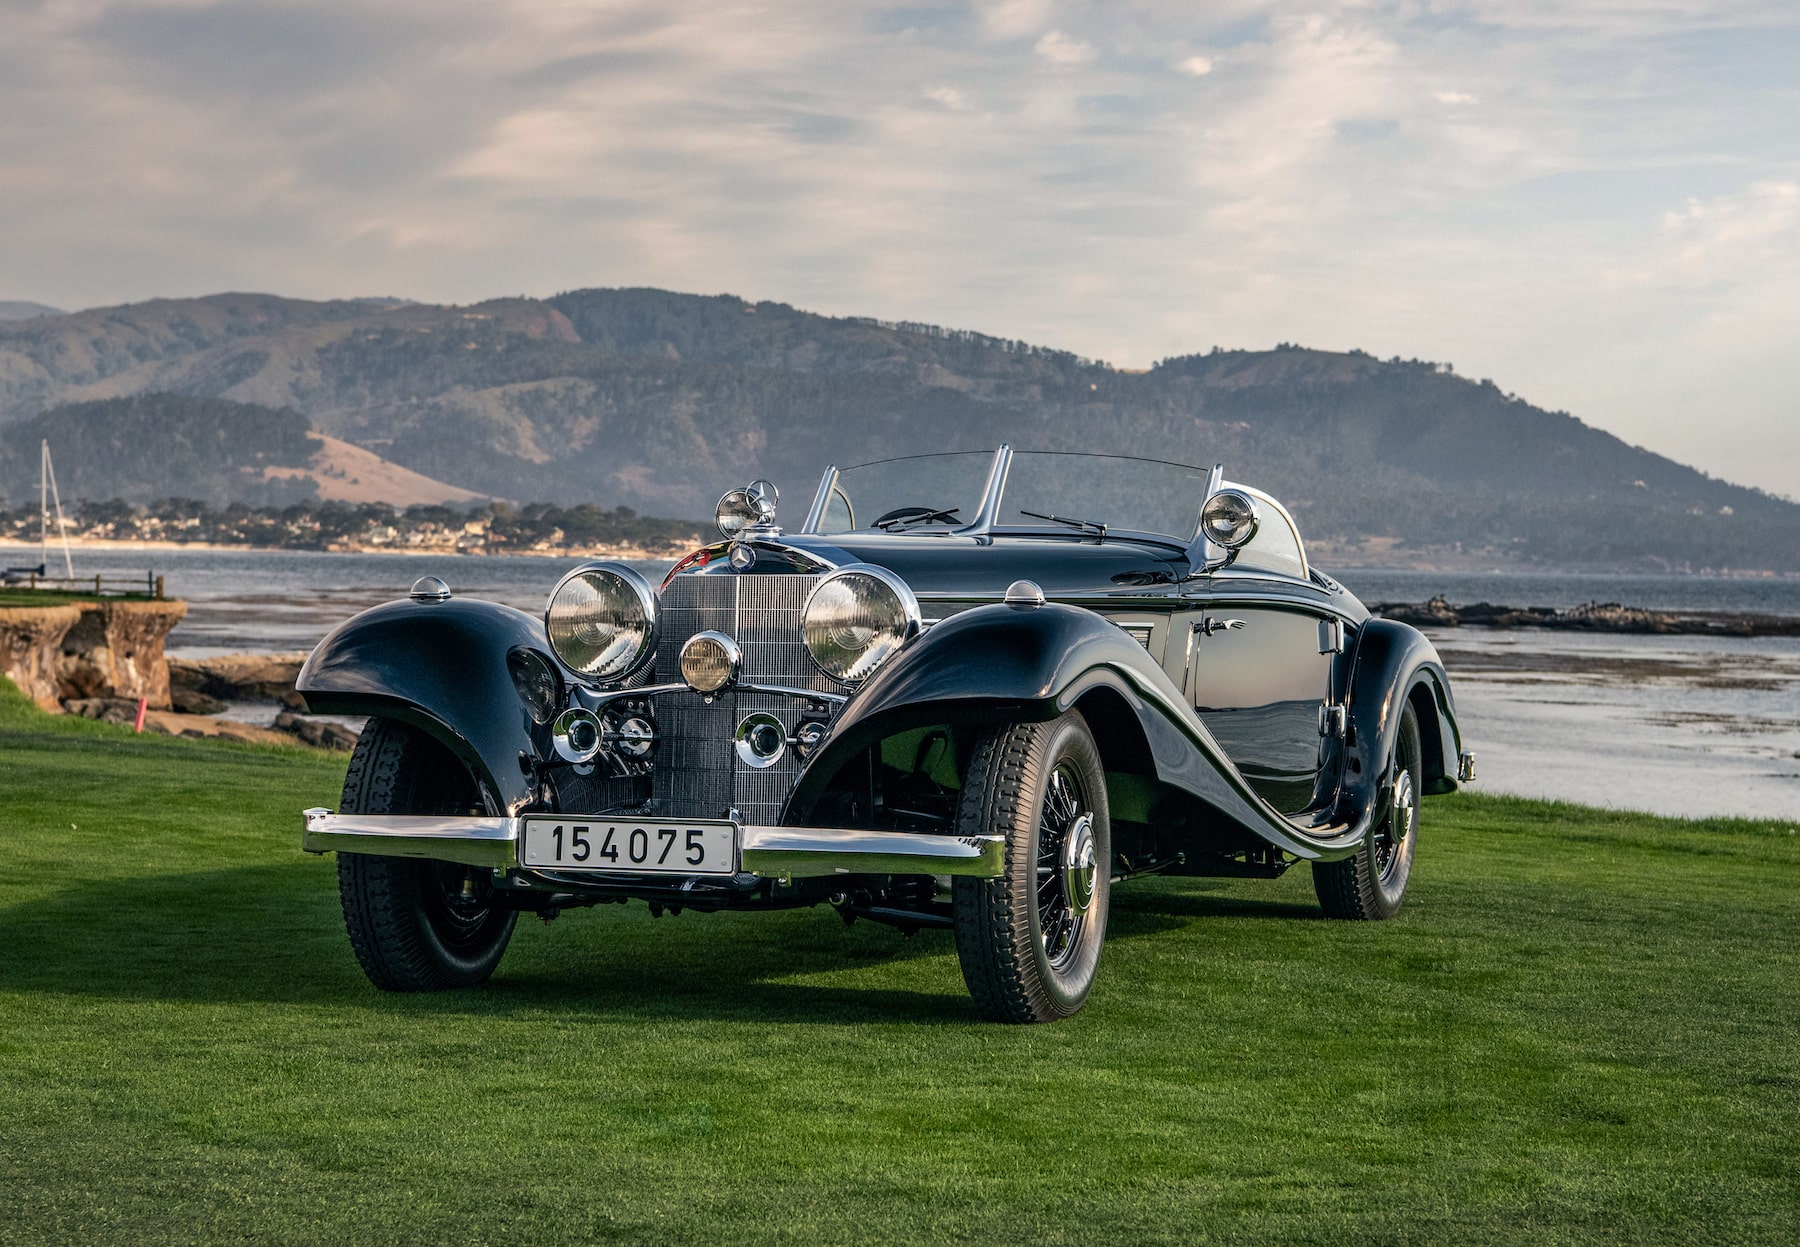 Mercedes-Benz 540 K Special Roadster Picks up “Best in Show” at Pebble Beach